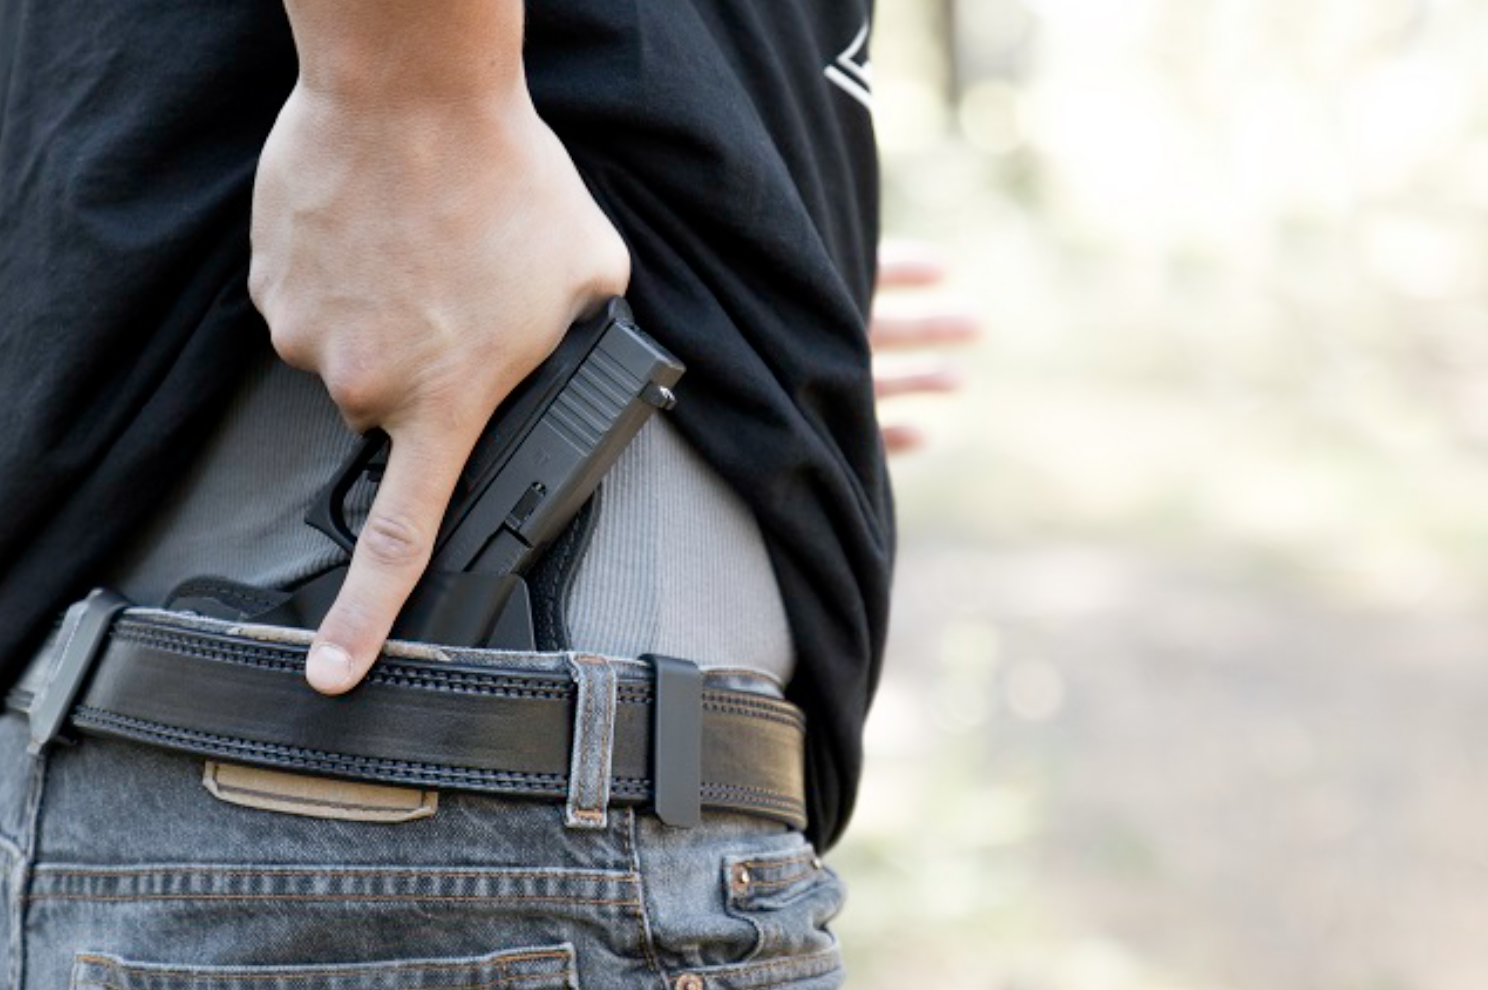 Concealed Carry Class for NC